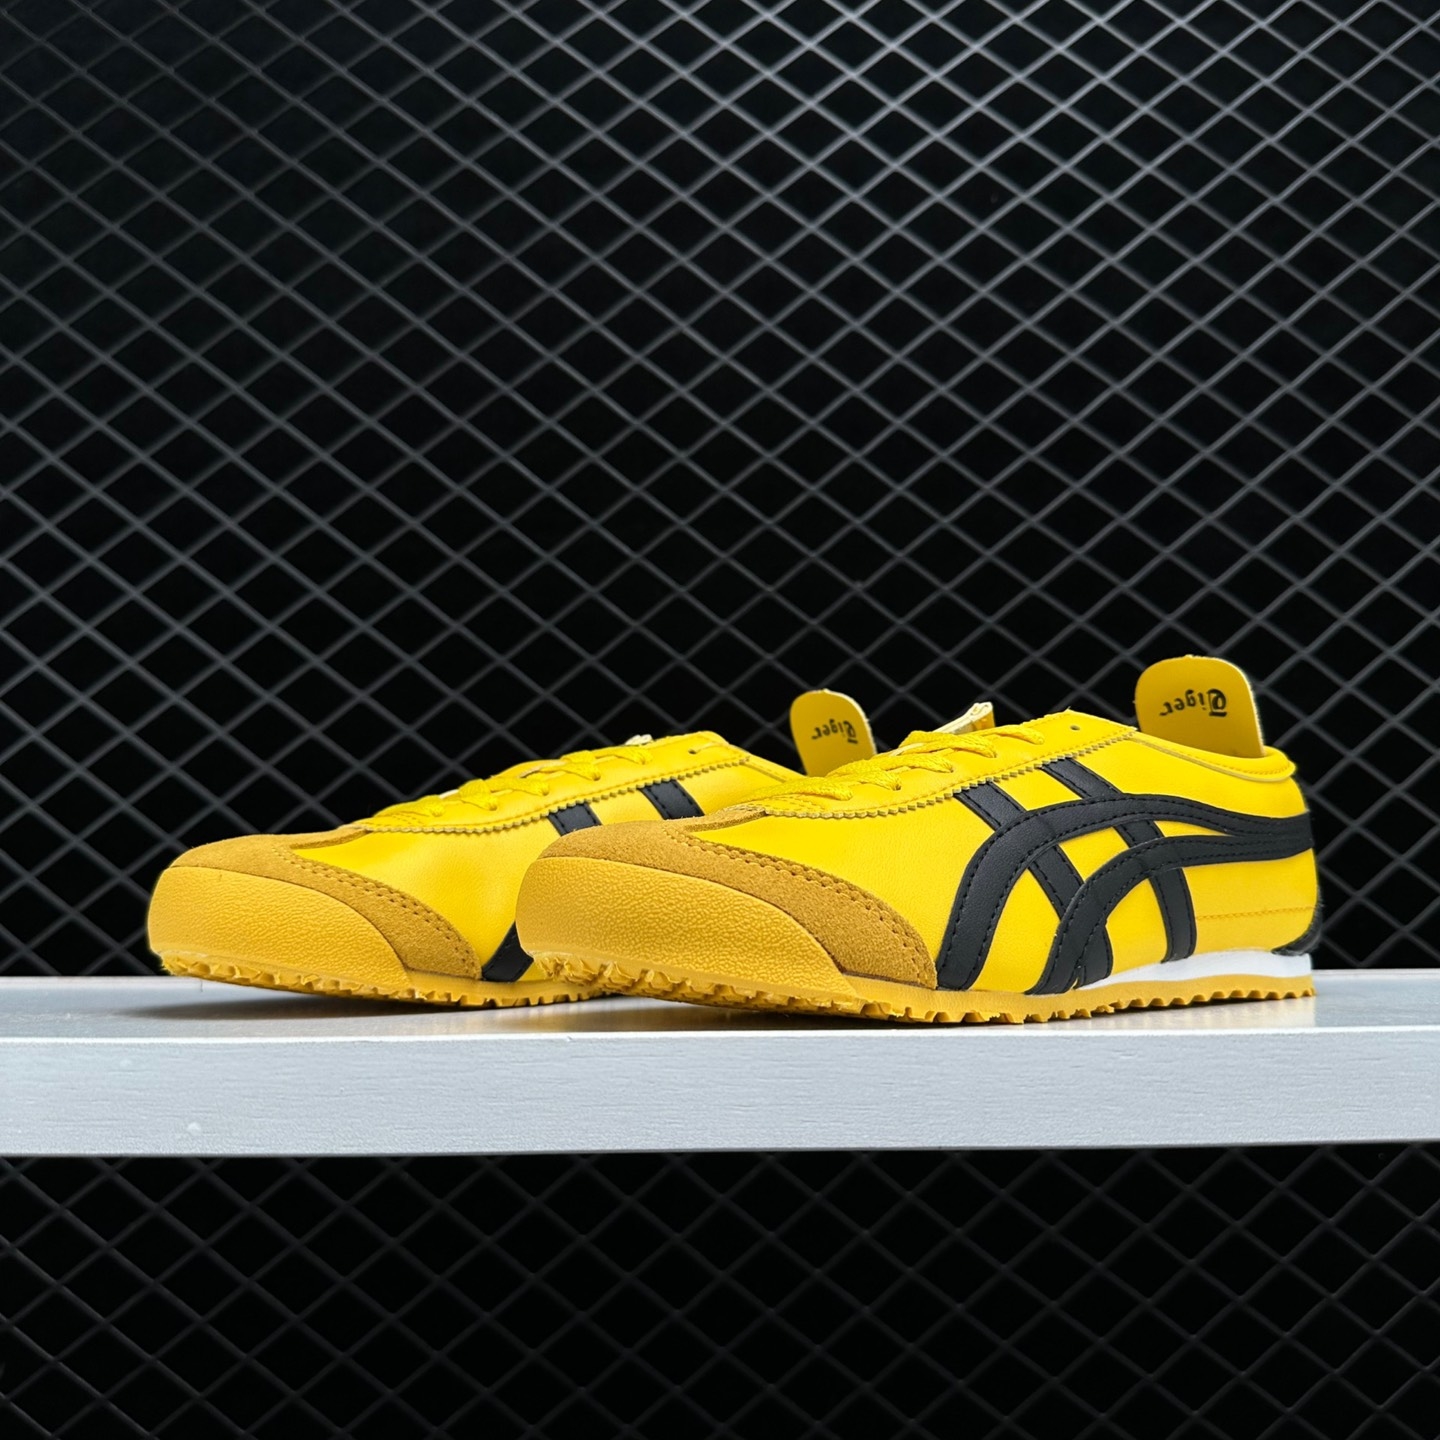 Onitsuka Tiger Mexico 66 Shoes Yellow 1183A746-750 | Stylish Sneakers